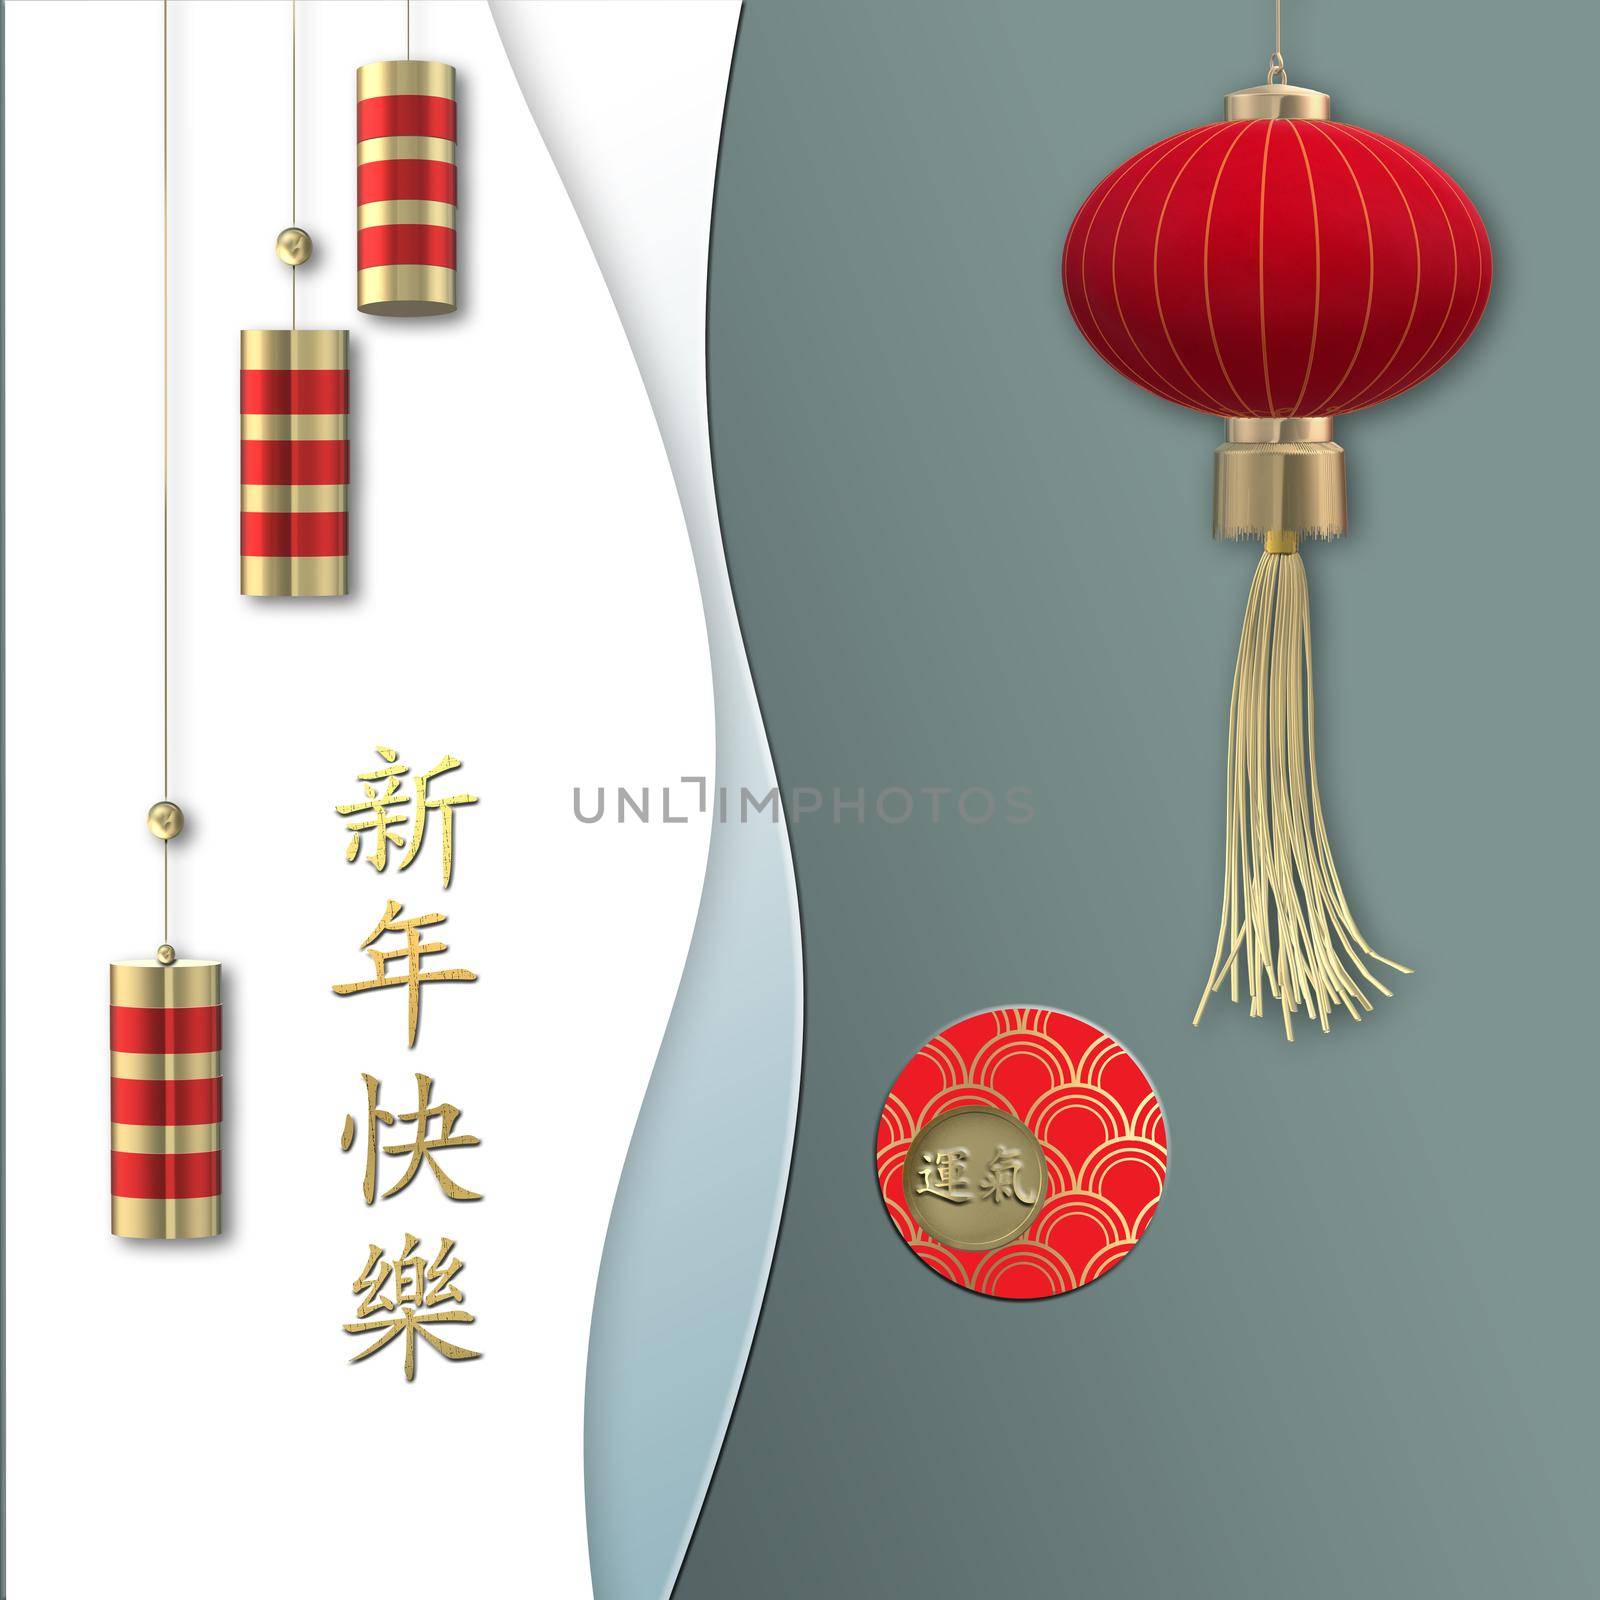 Chinese new year. Lantern, crackers. Oriental Asian symbols on pastel white green. Lucky coin with text Chinese translation Luck. Gold Chinese text Happy New Year. 3D render